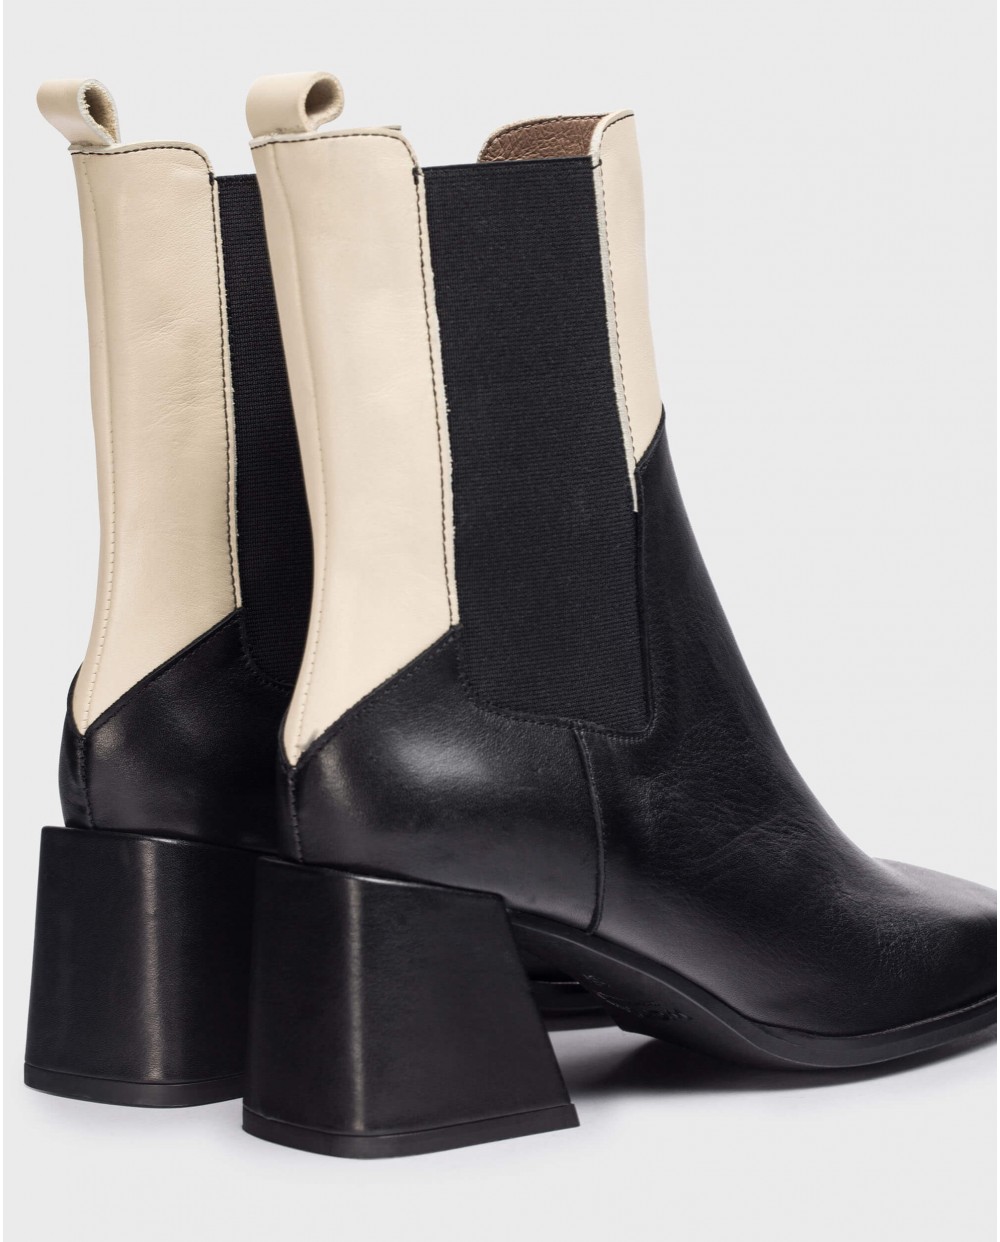 Wonders-Ankle Boots-Black TOTE ankle boot